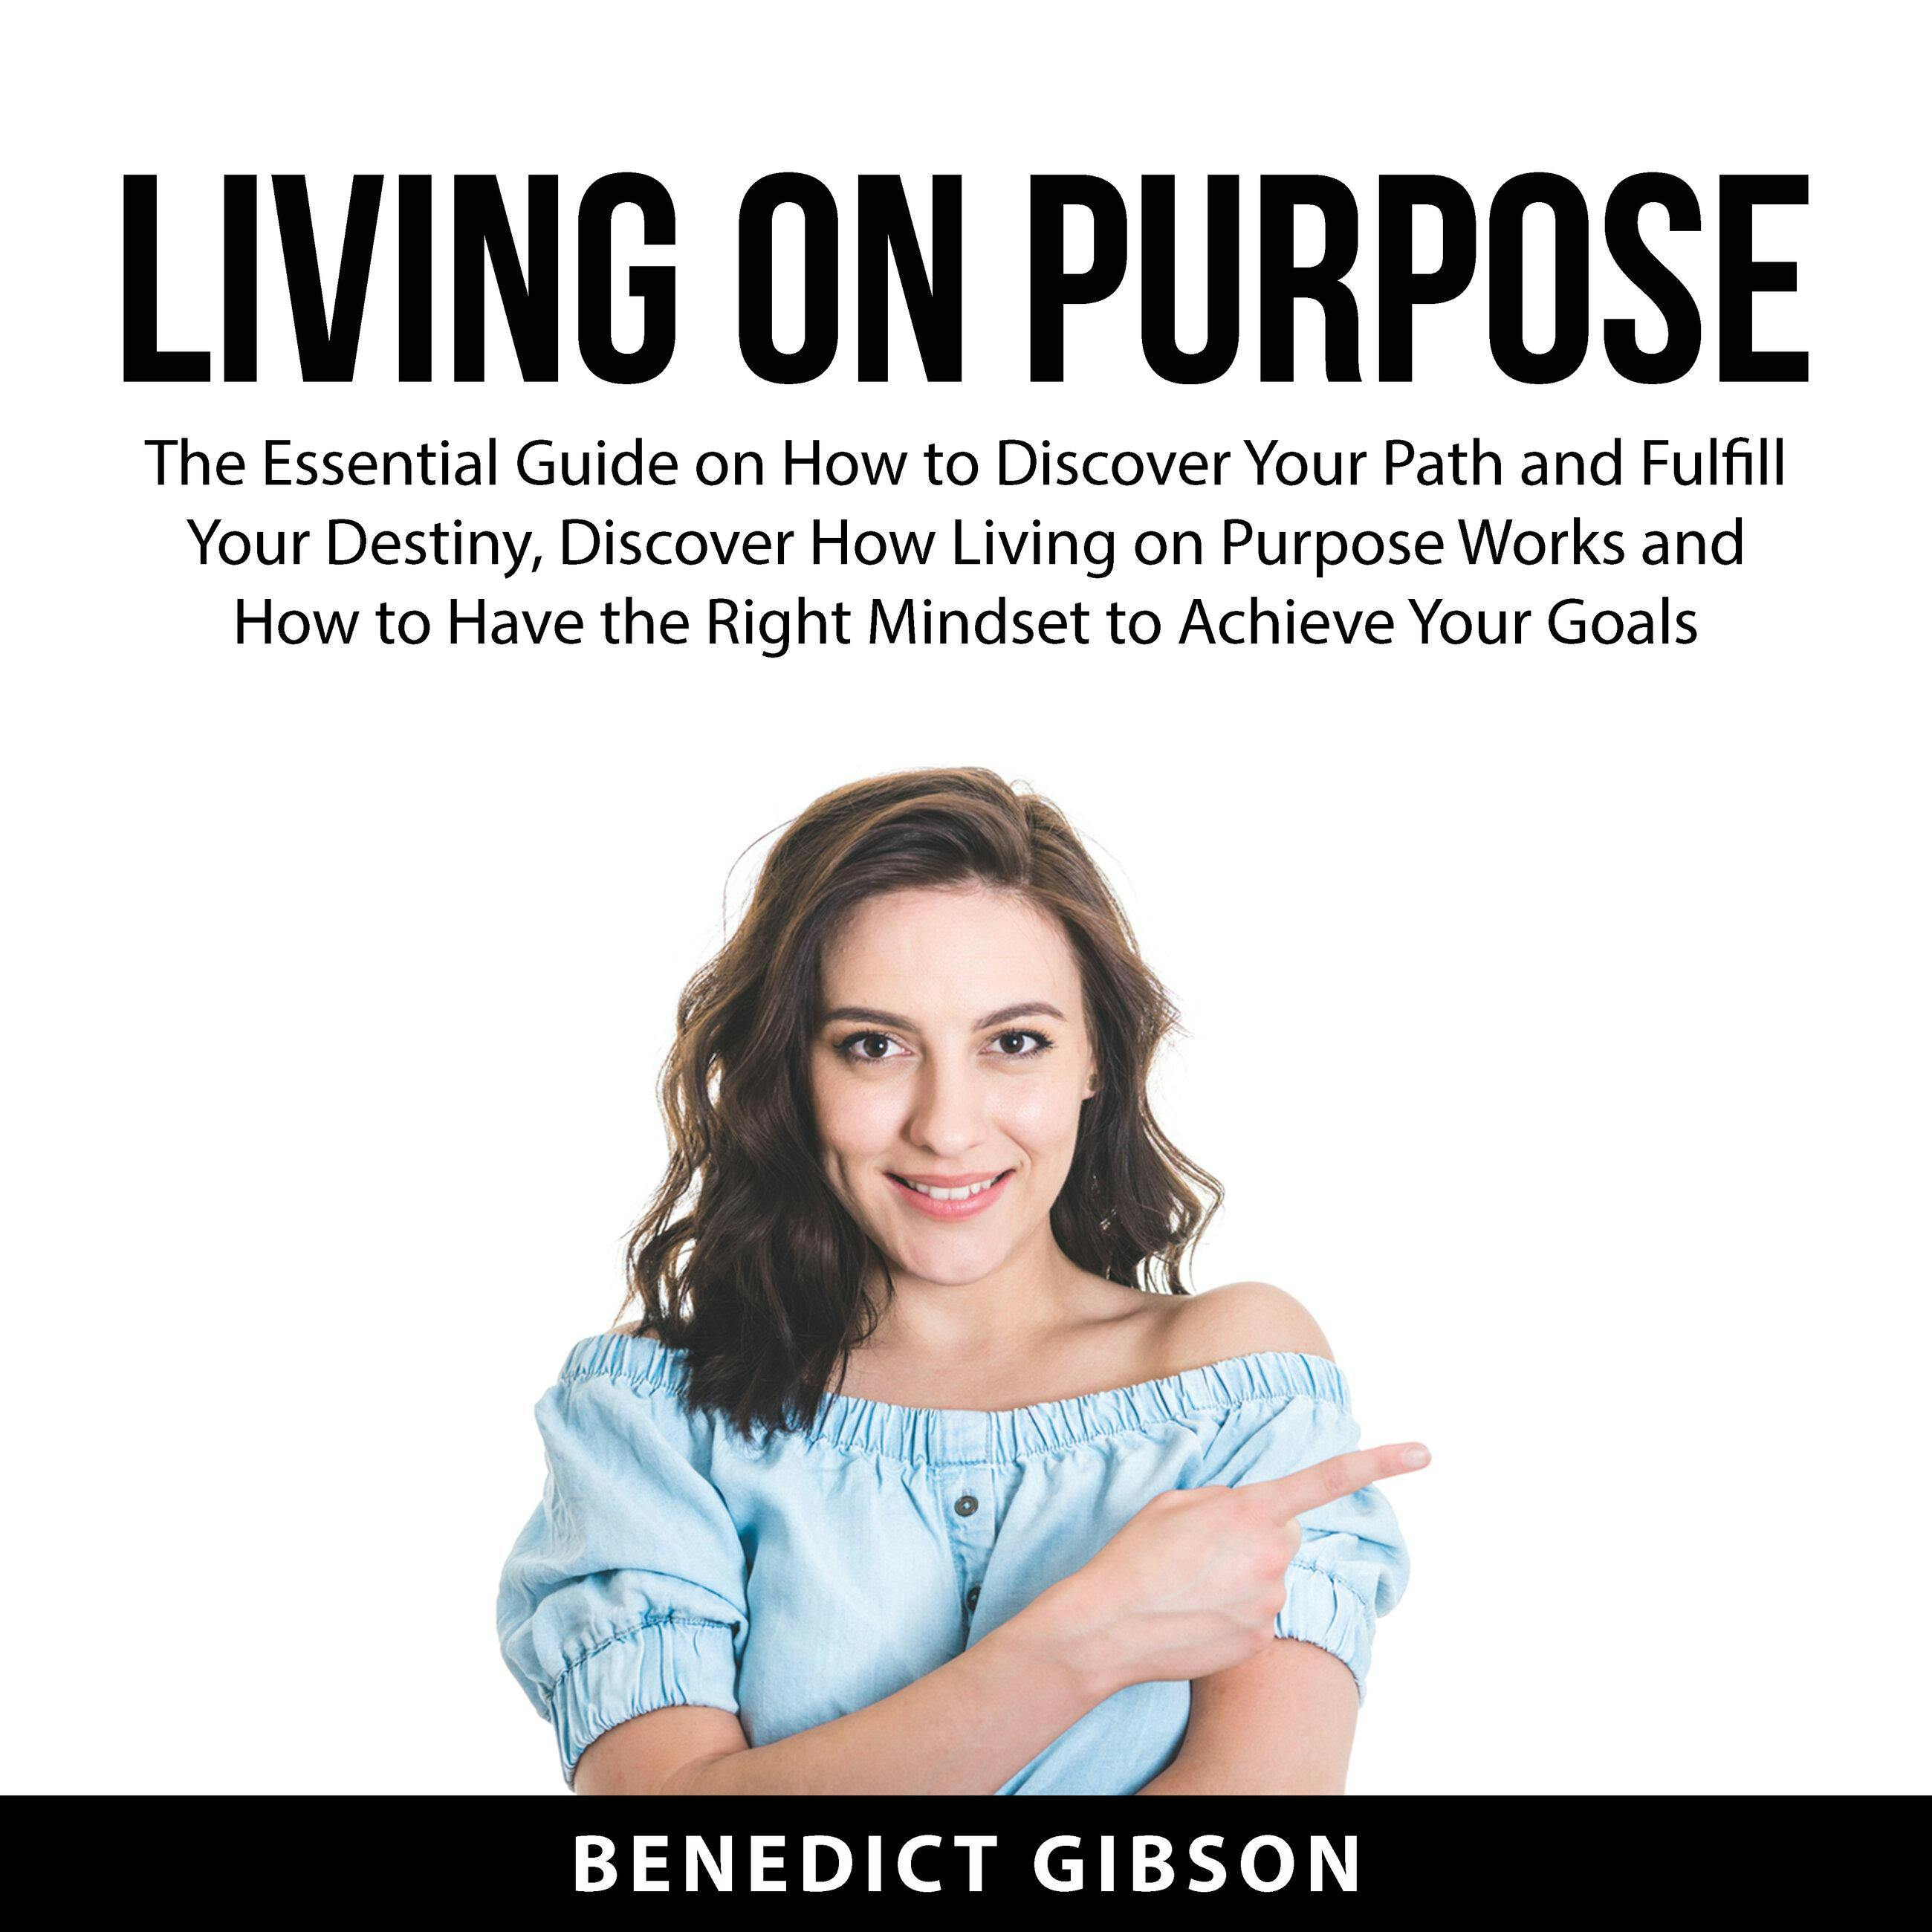 Living On Purpose: The Essential Guide on How to Discover Your Path and Fulfill Your Destiny, Discover How Living on Purpose Works and How to Have the Right Mindset to Achieve Your Goals - undefined